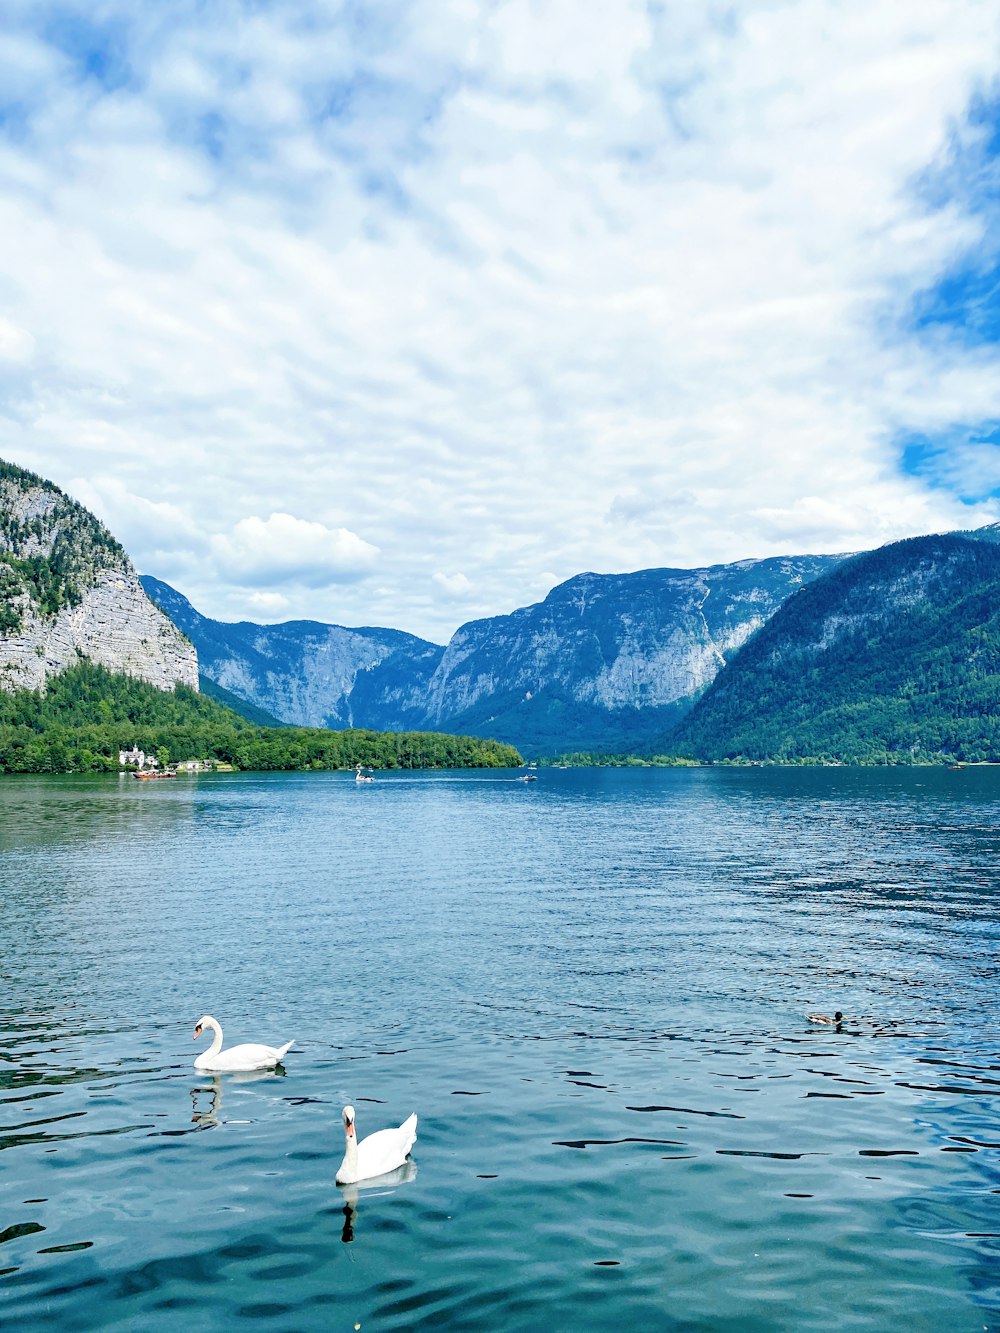 two swans swimming in a lake with mountains in the background